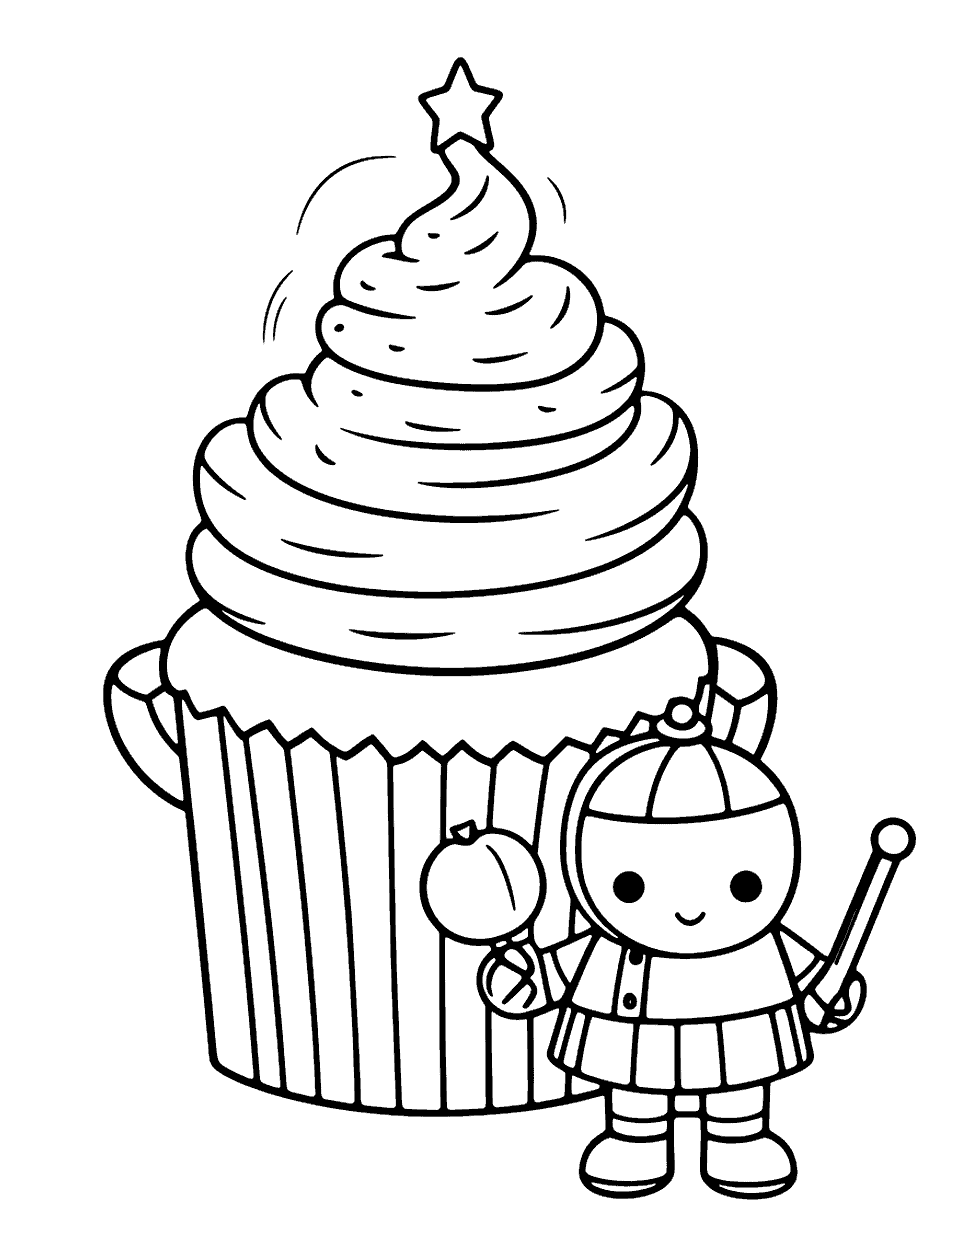 Knight and Cupcake Coloring Page - A cupcake beside a small toy knight in candy armor.